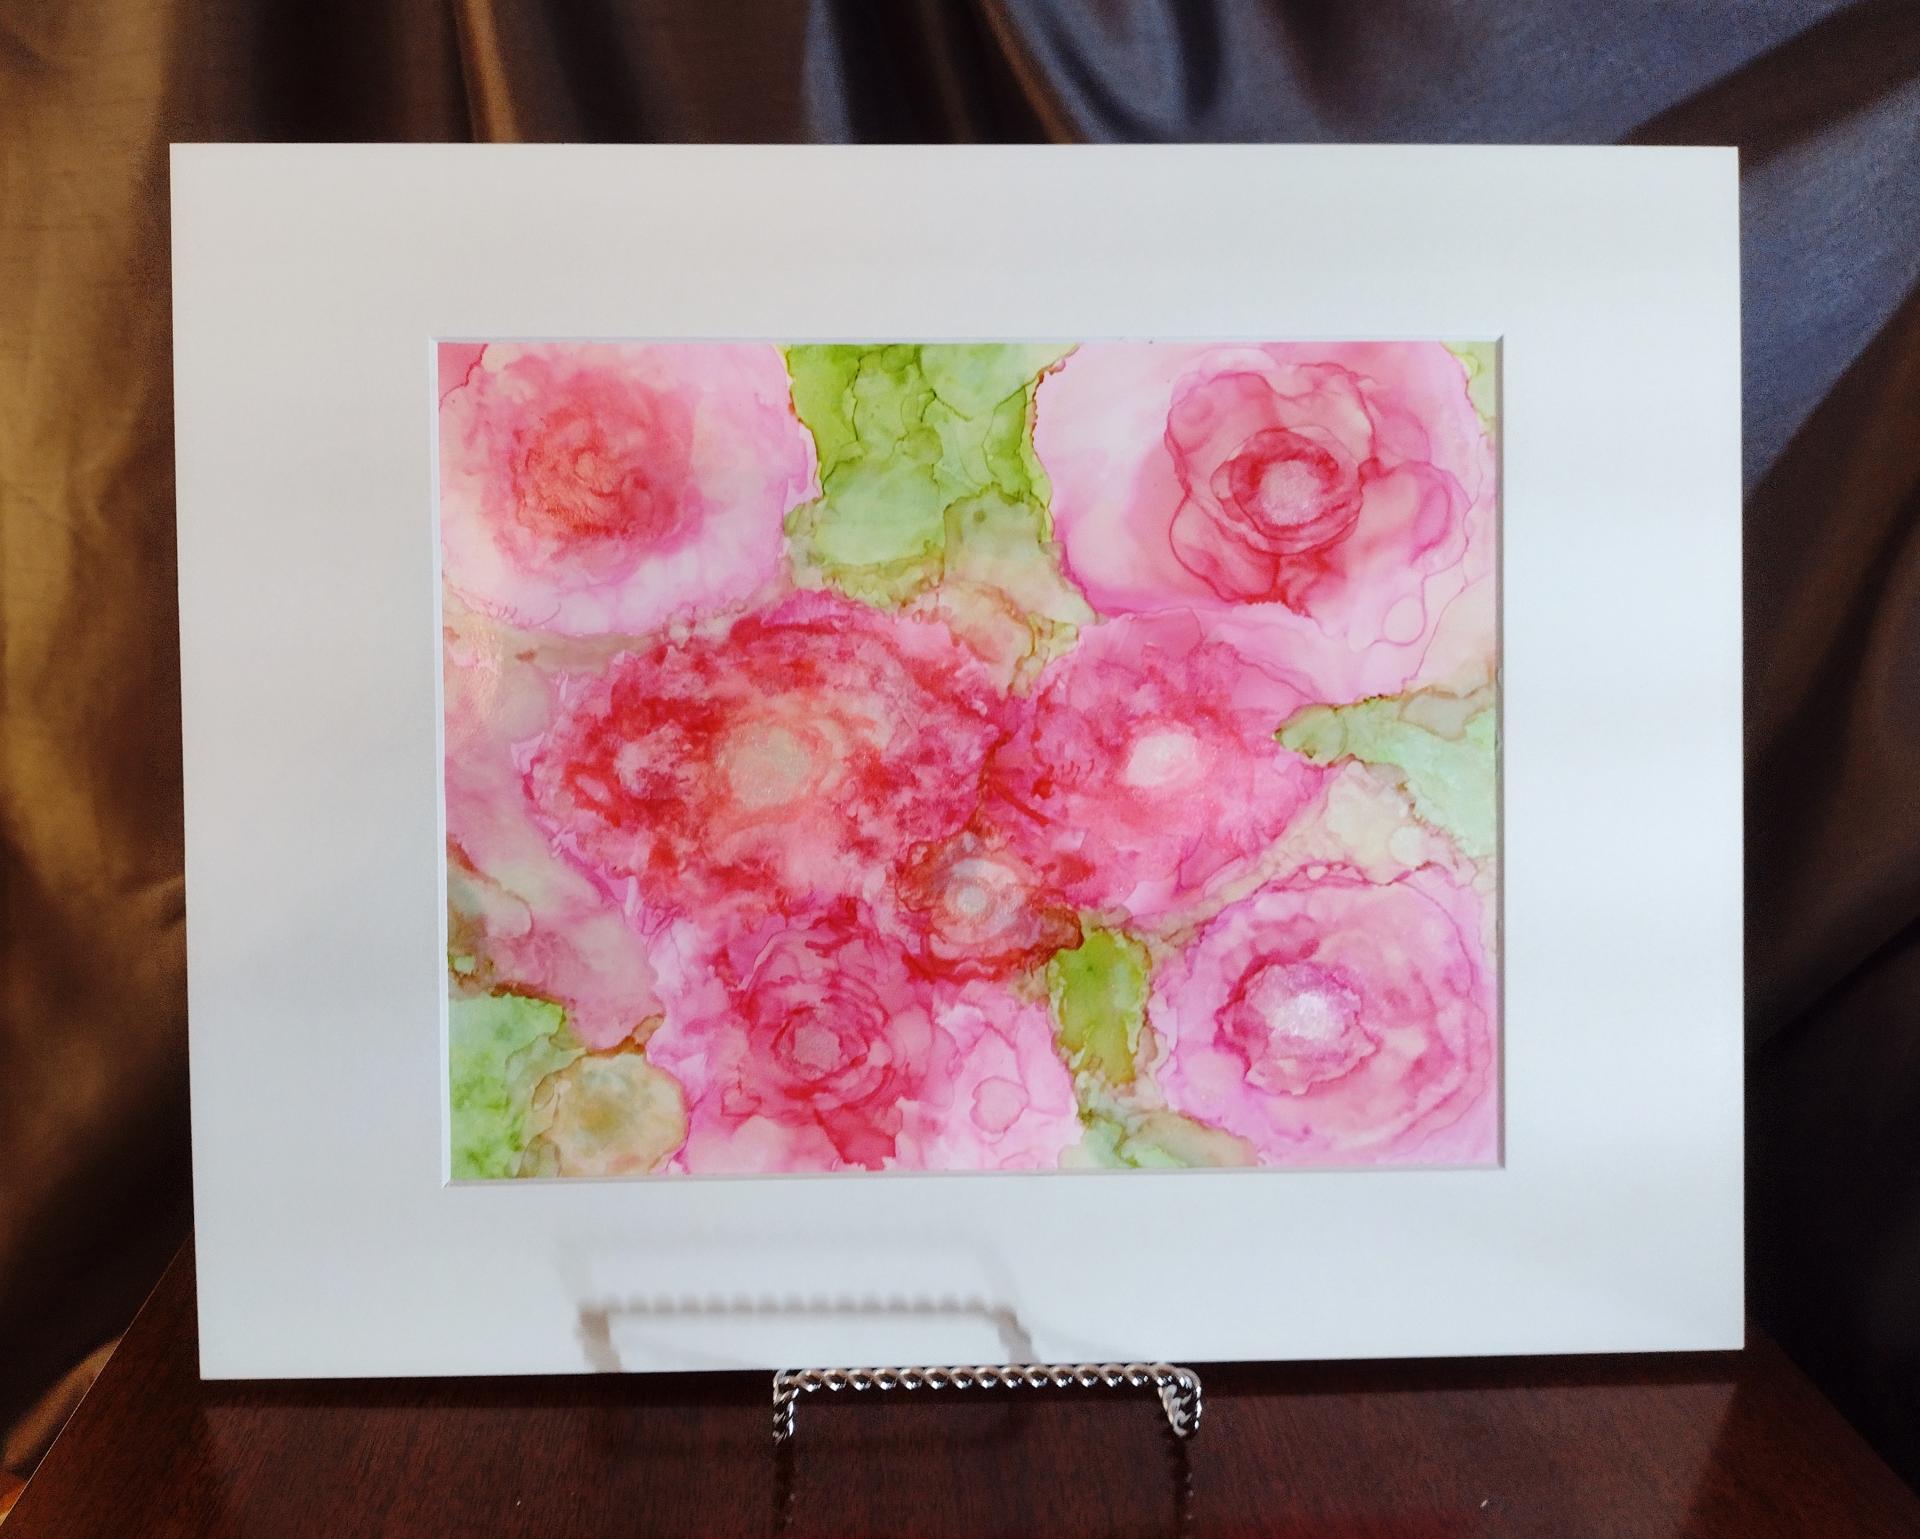 Alcohol Ink Painting, 8 x 10 Matted to 11 x 14, Pink Peonies Floral Abstract